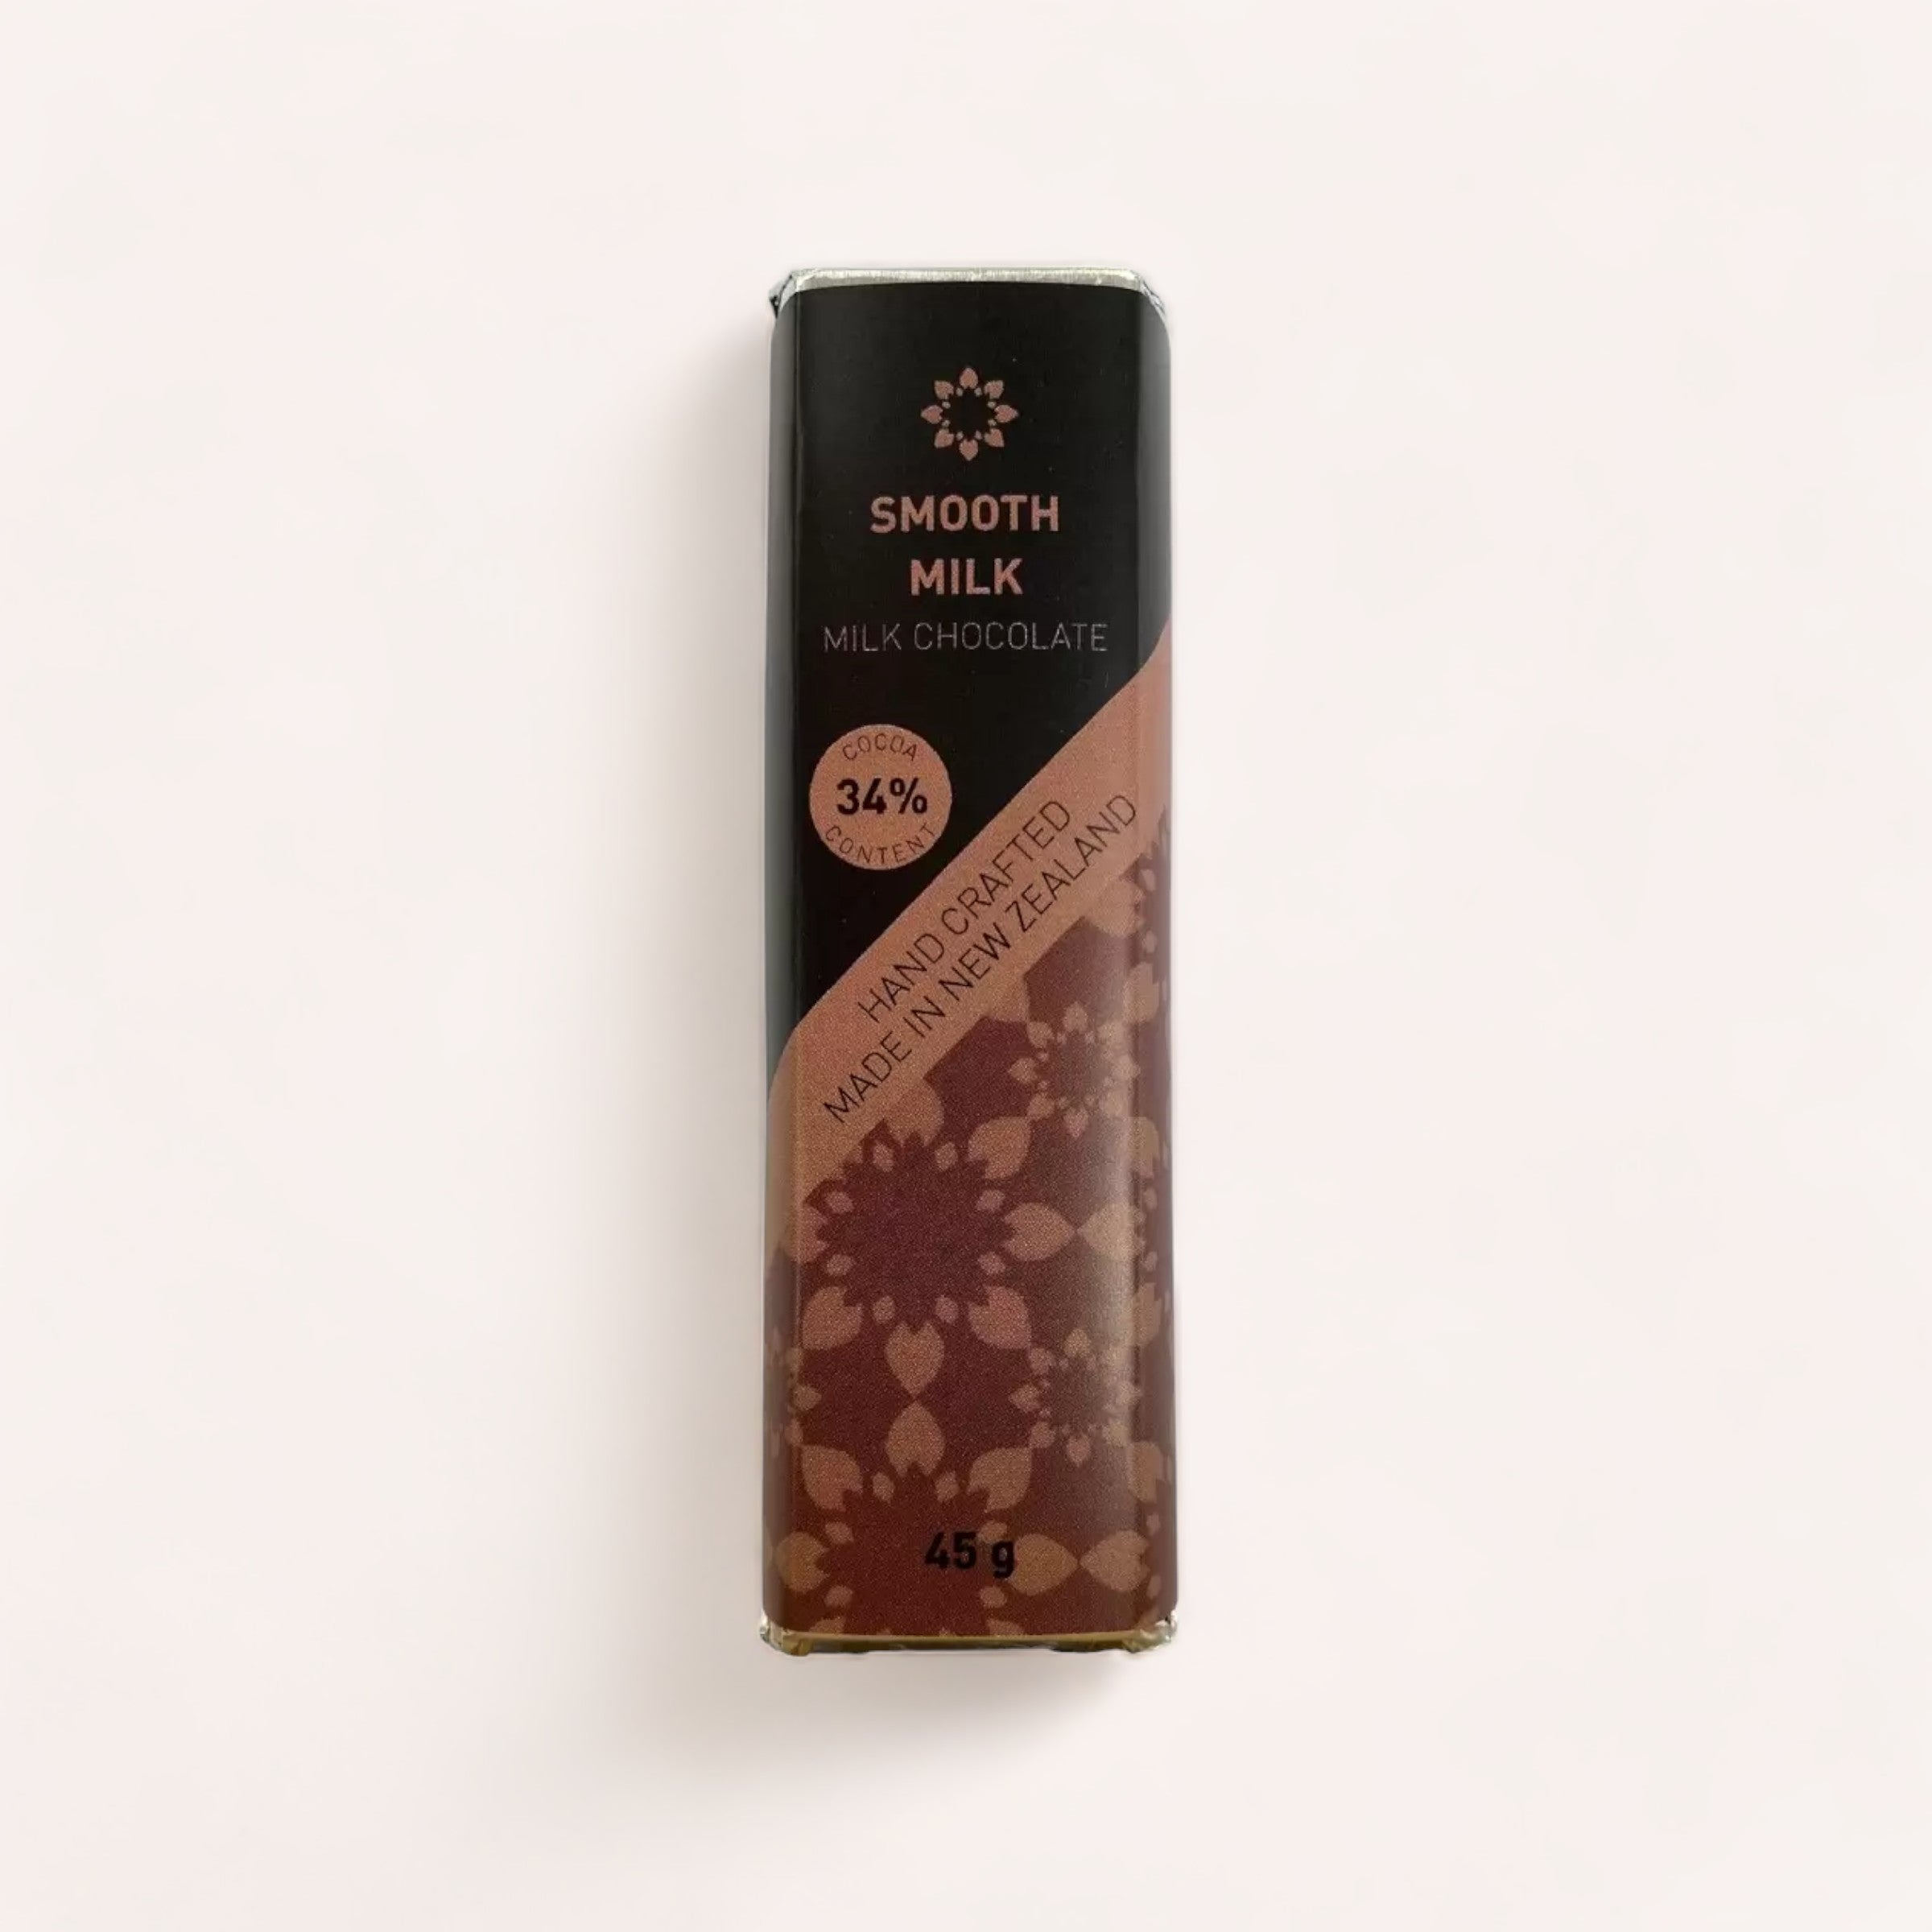 A Milk Chocolate bar by Chocolate Traders of smooth milk chocolate with elegant floral-patterned packaging, highlighting that it's handcrafted and contains 34% cocoa, weighing 45g.